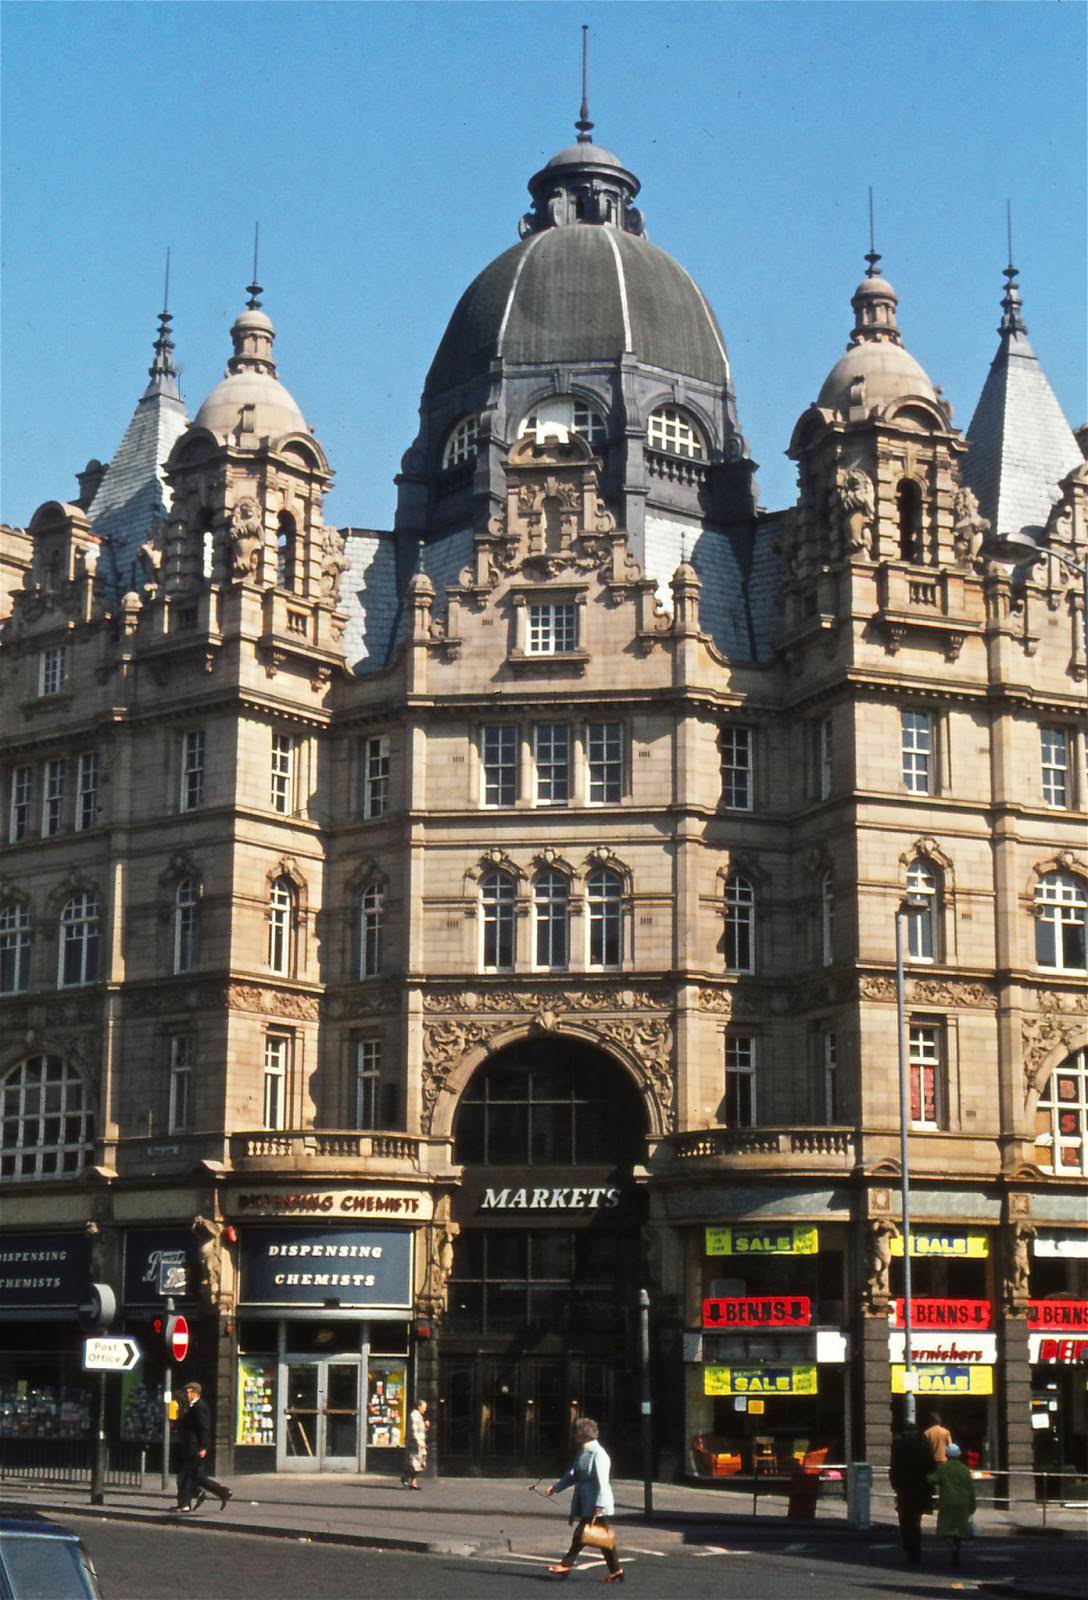 Entrance to Kirkgate Market with its wonderful Victorian facade.